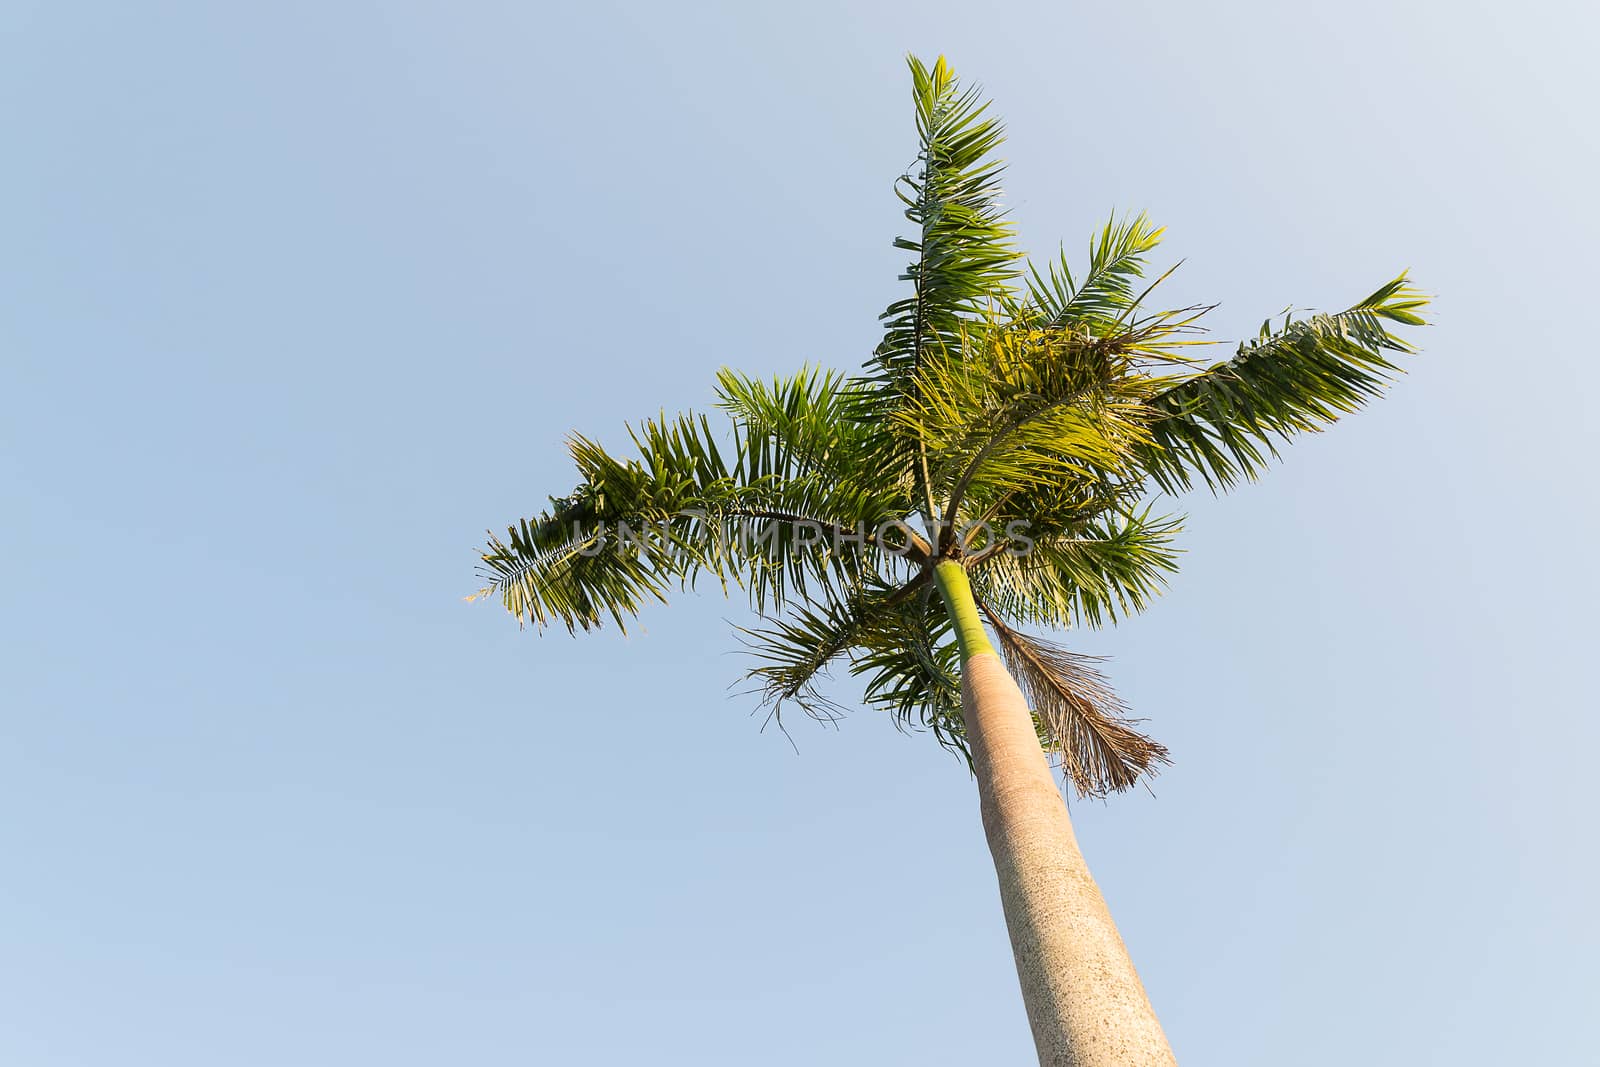 Foxtail palm tree in the wind with blue sky background by gypsygraphy